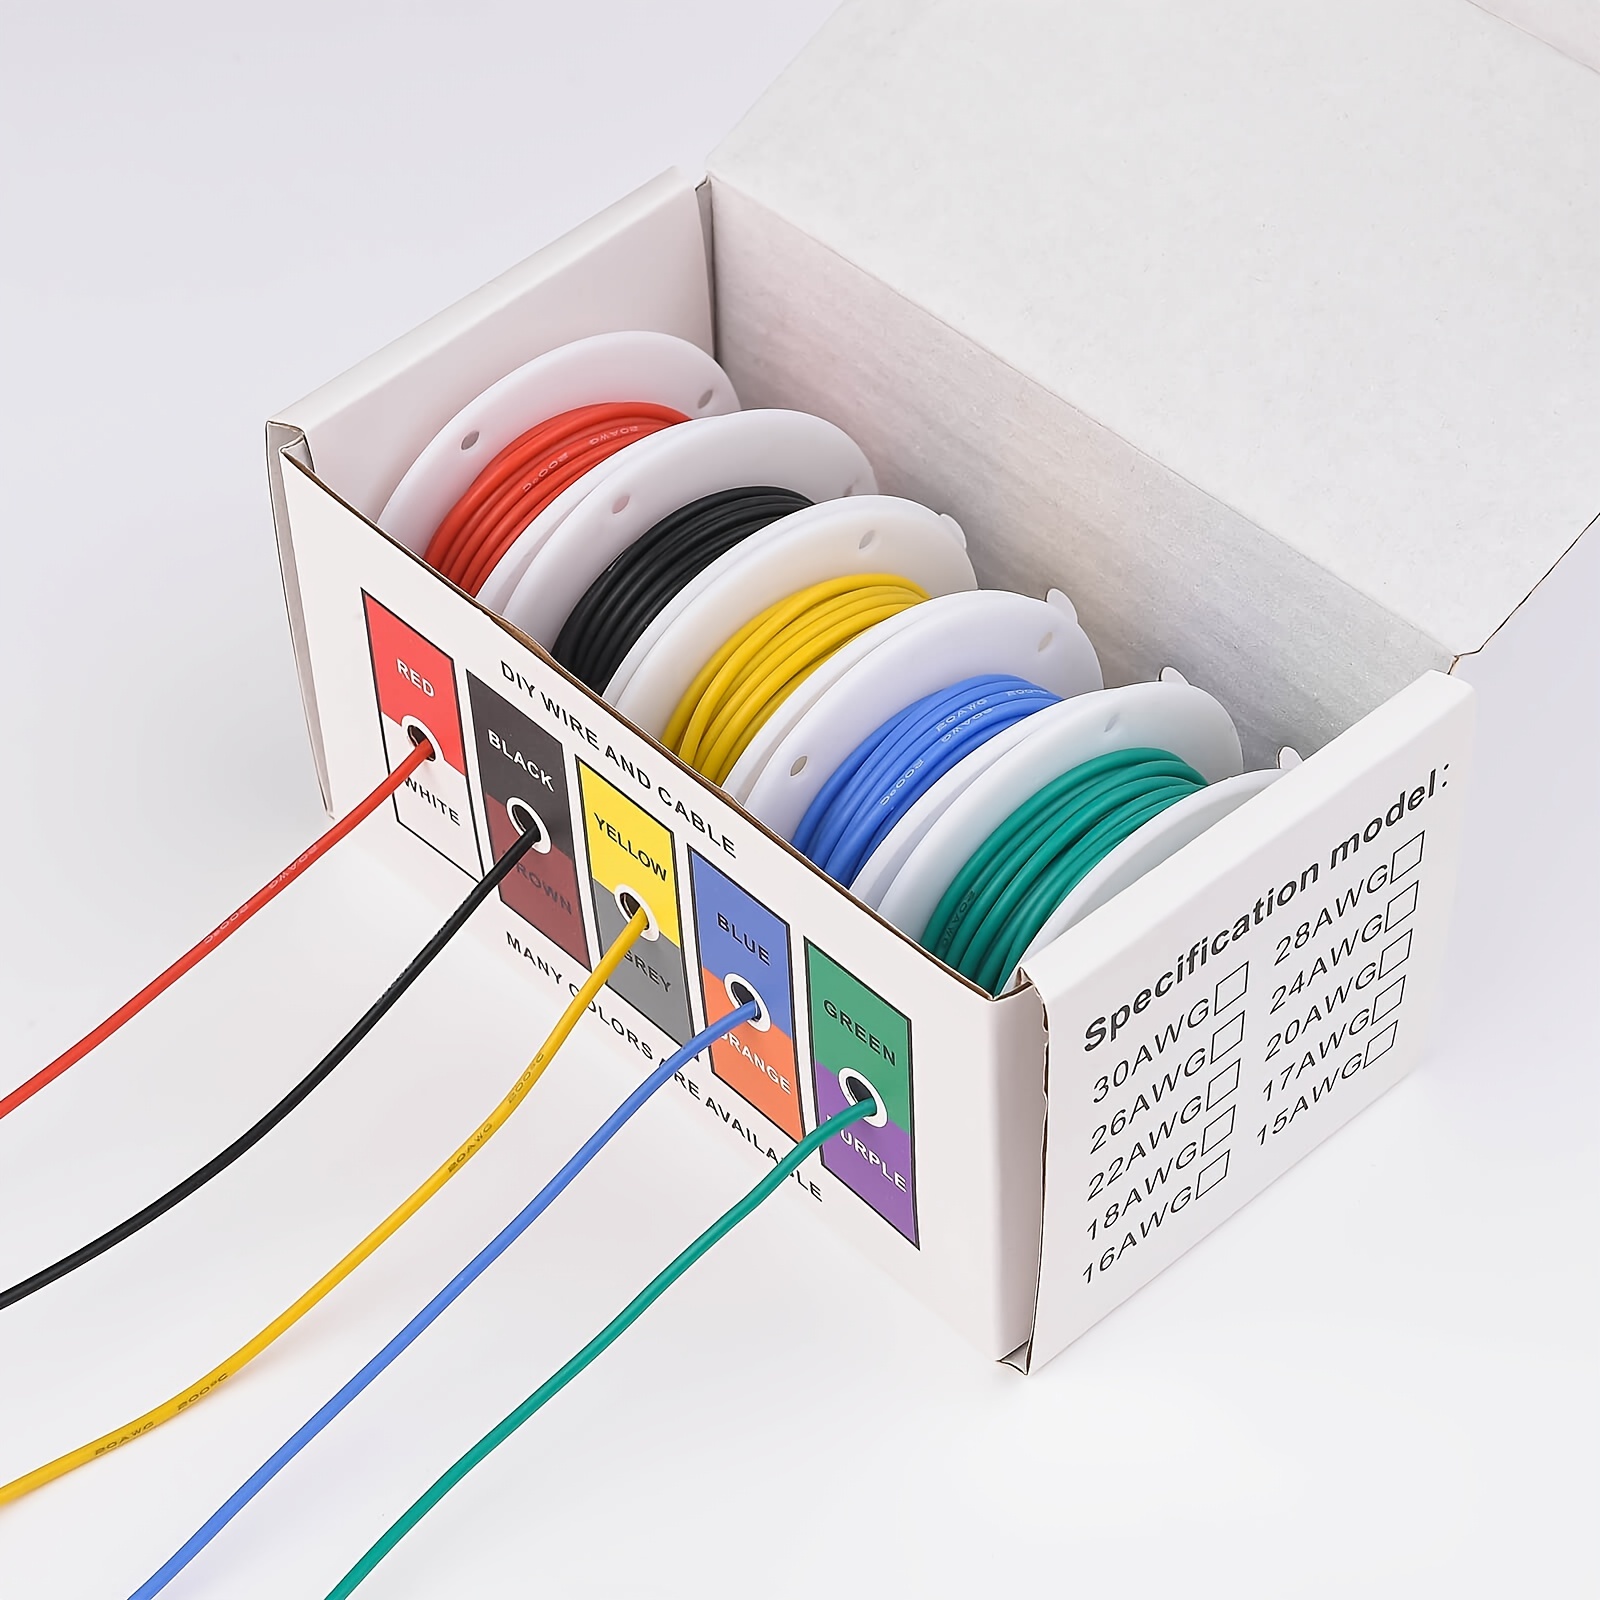 20AWG Electric Wire Flexible Silicone Wires 20 Gauge Stranded Tinned Copper Wire, OD:1.8mm, 5 Colors 19.6ft/6m Each, DIY Electrical Hook Up Wire Kit